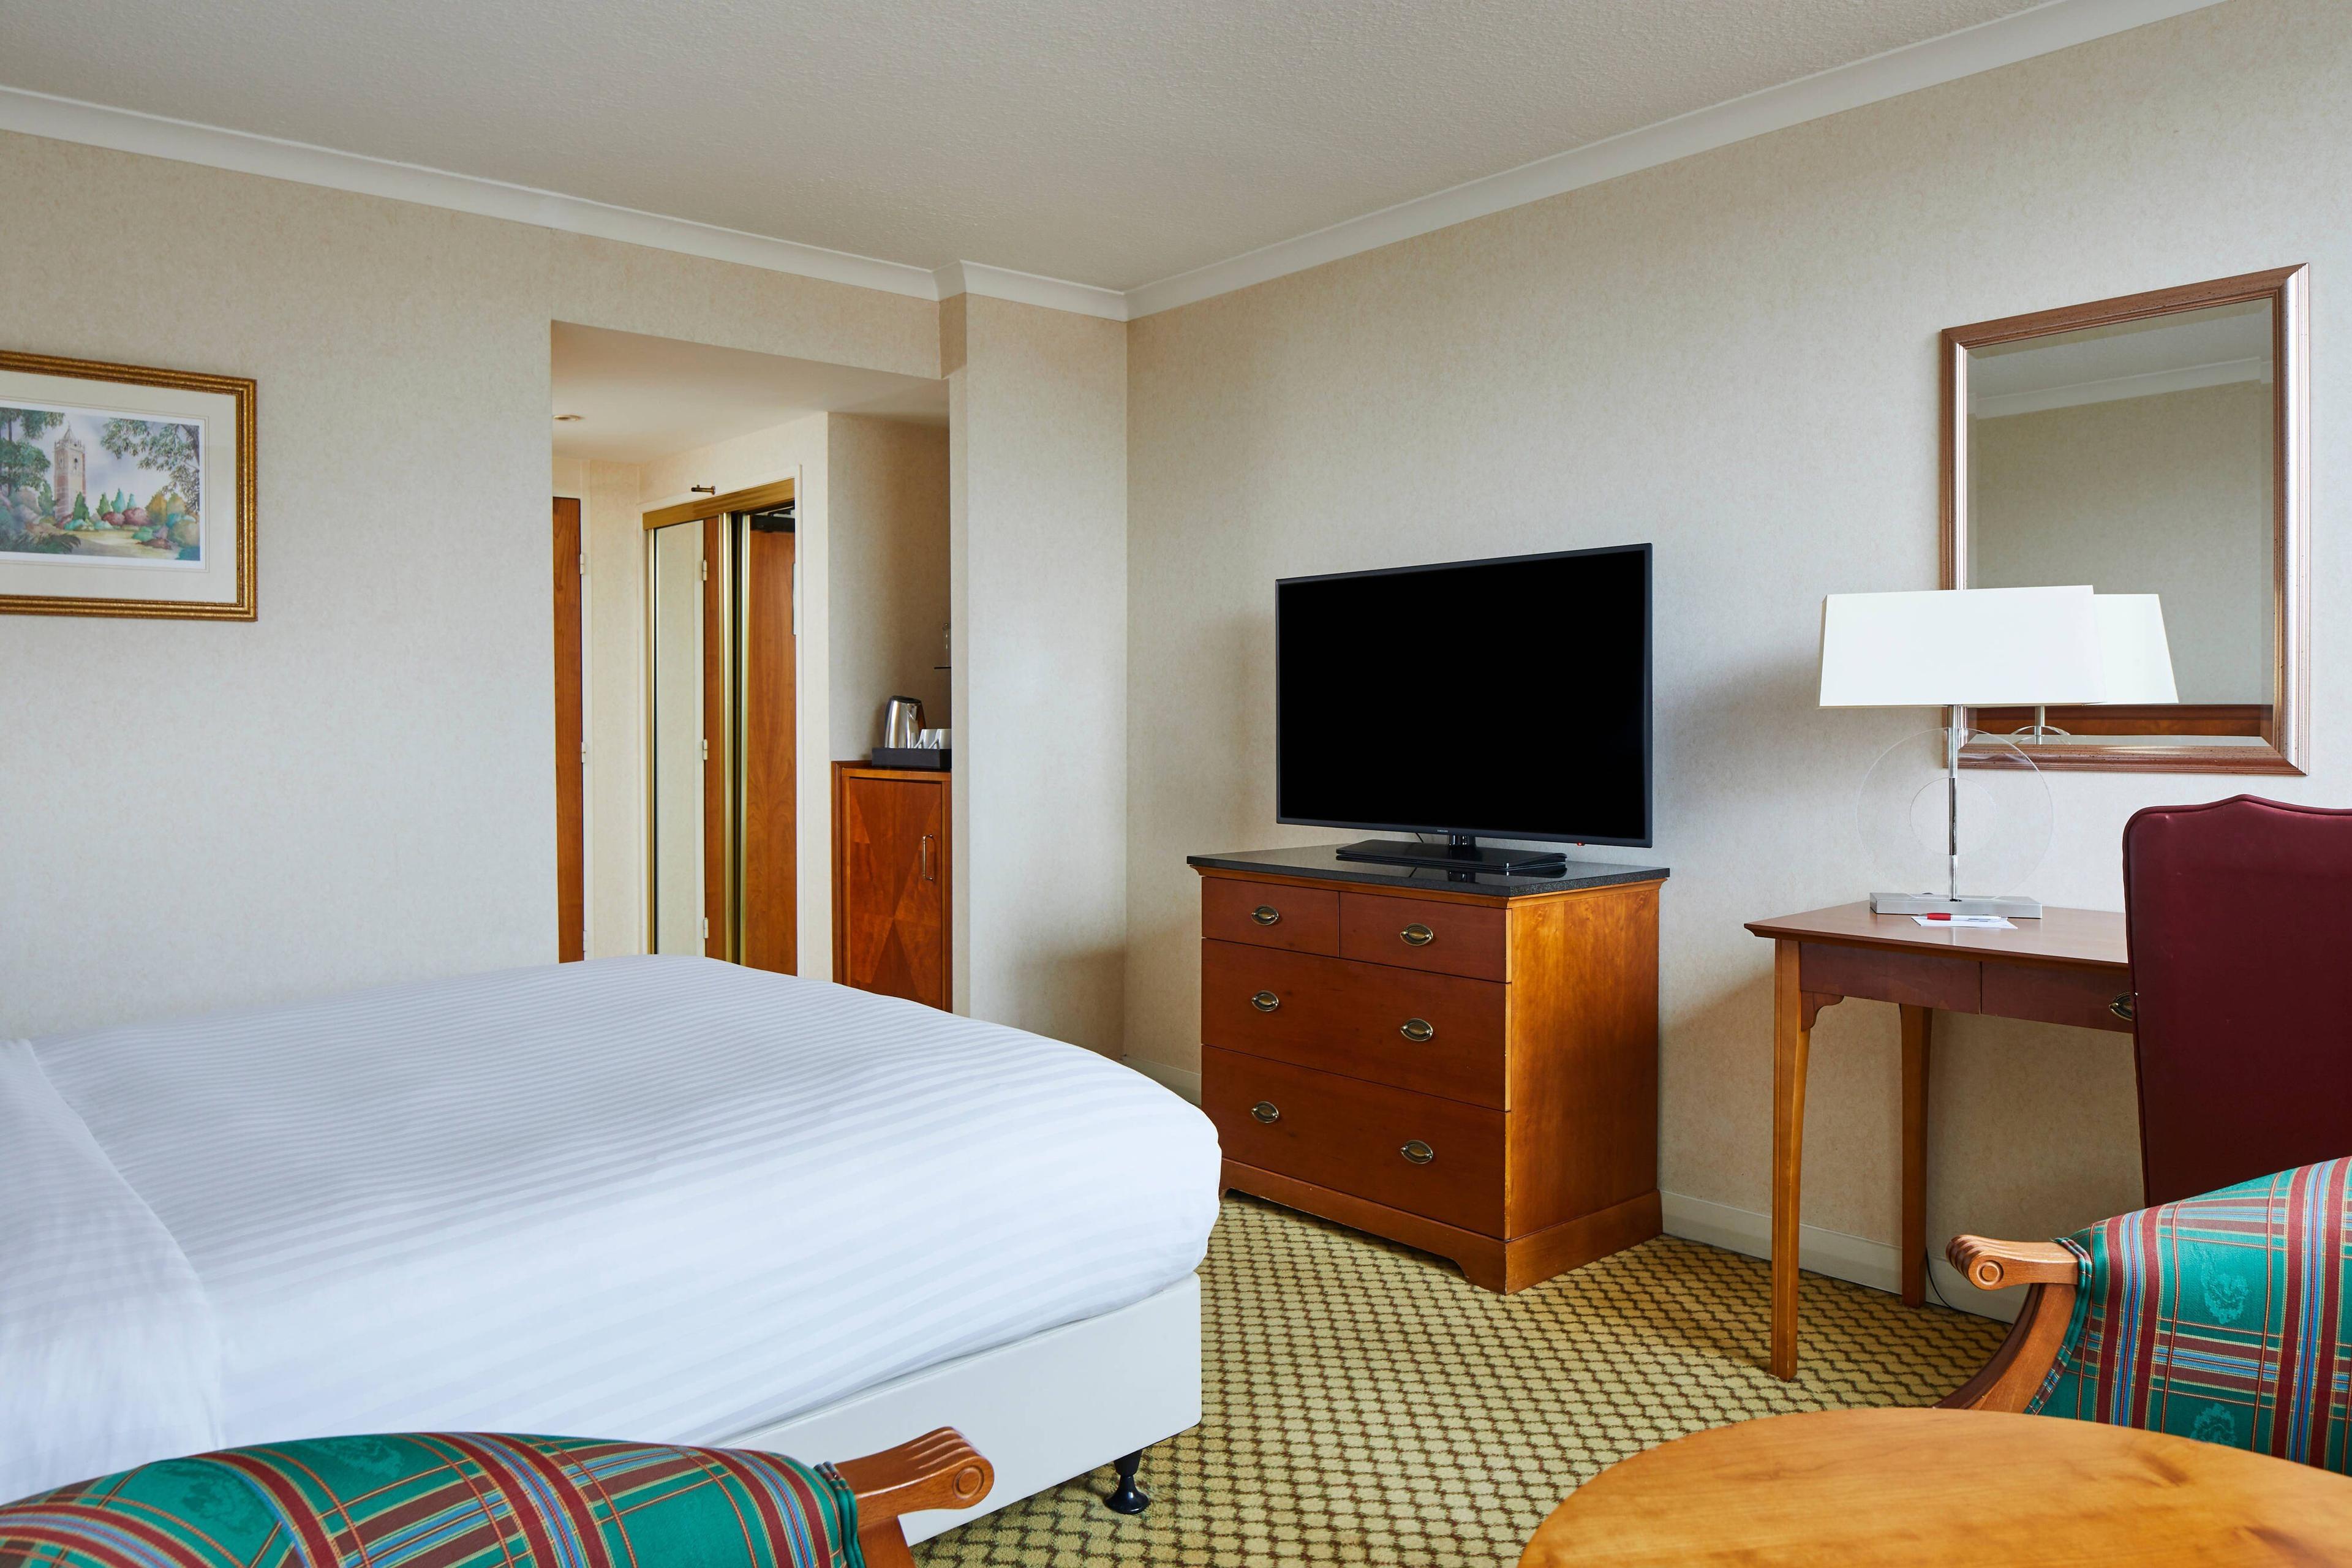 Enjoy our charming double deluxe guest room with a comfortable double bed plus a sitting area.